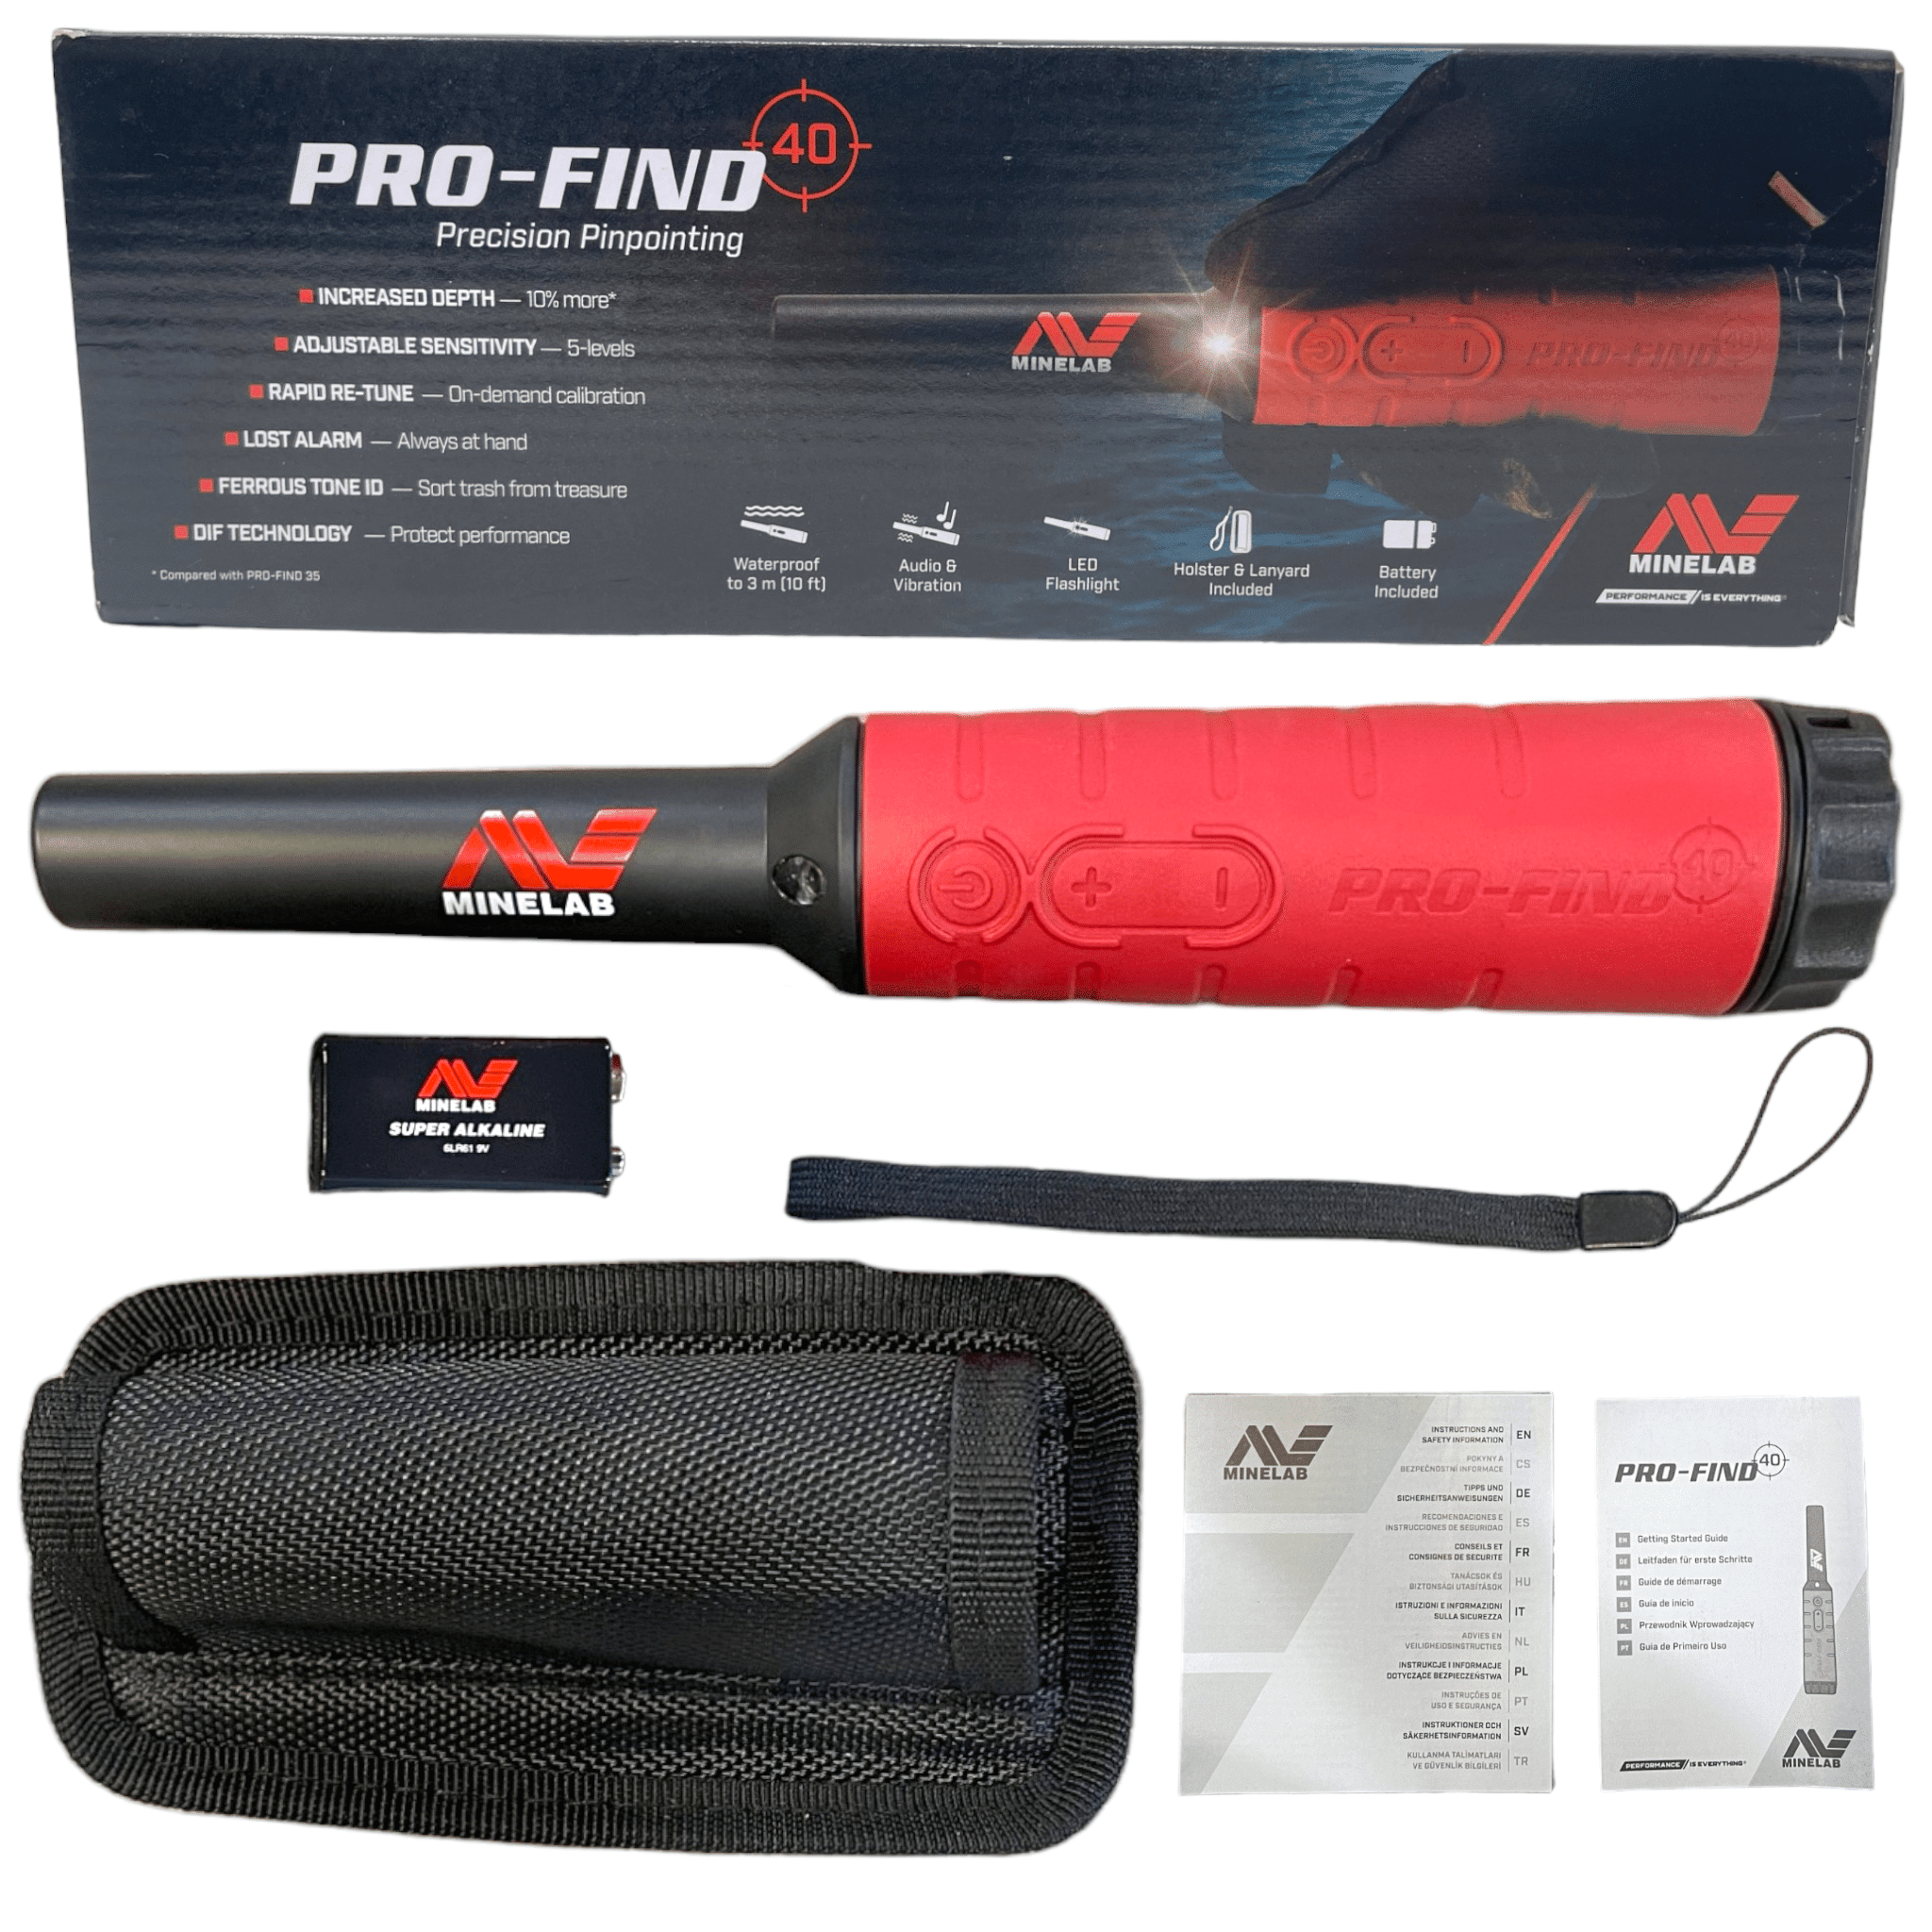 Pro Fiond 40 pinpointer metal detector